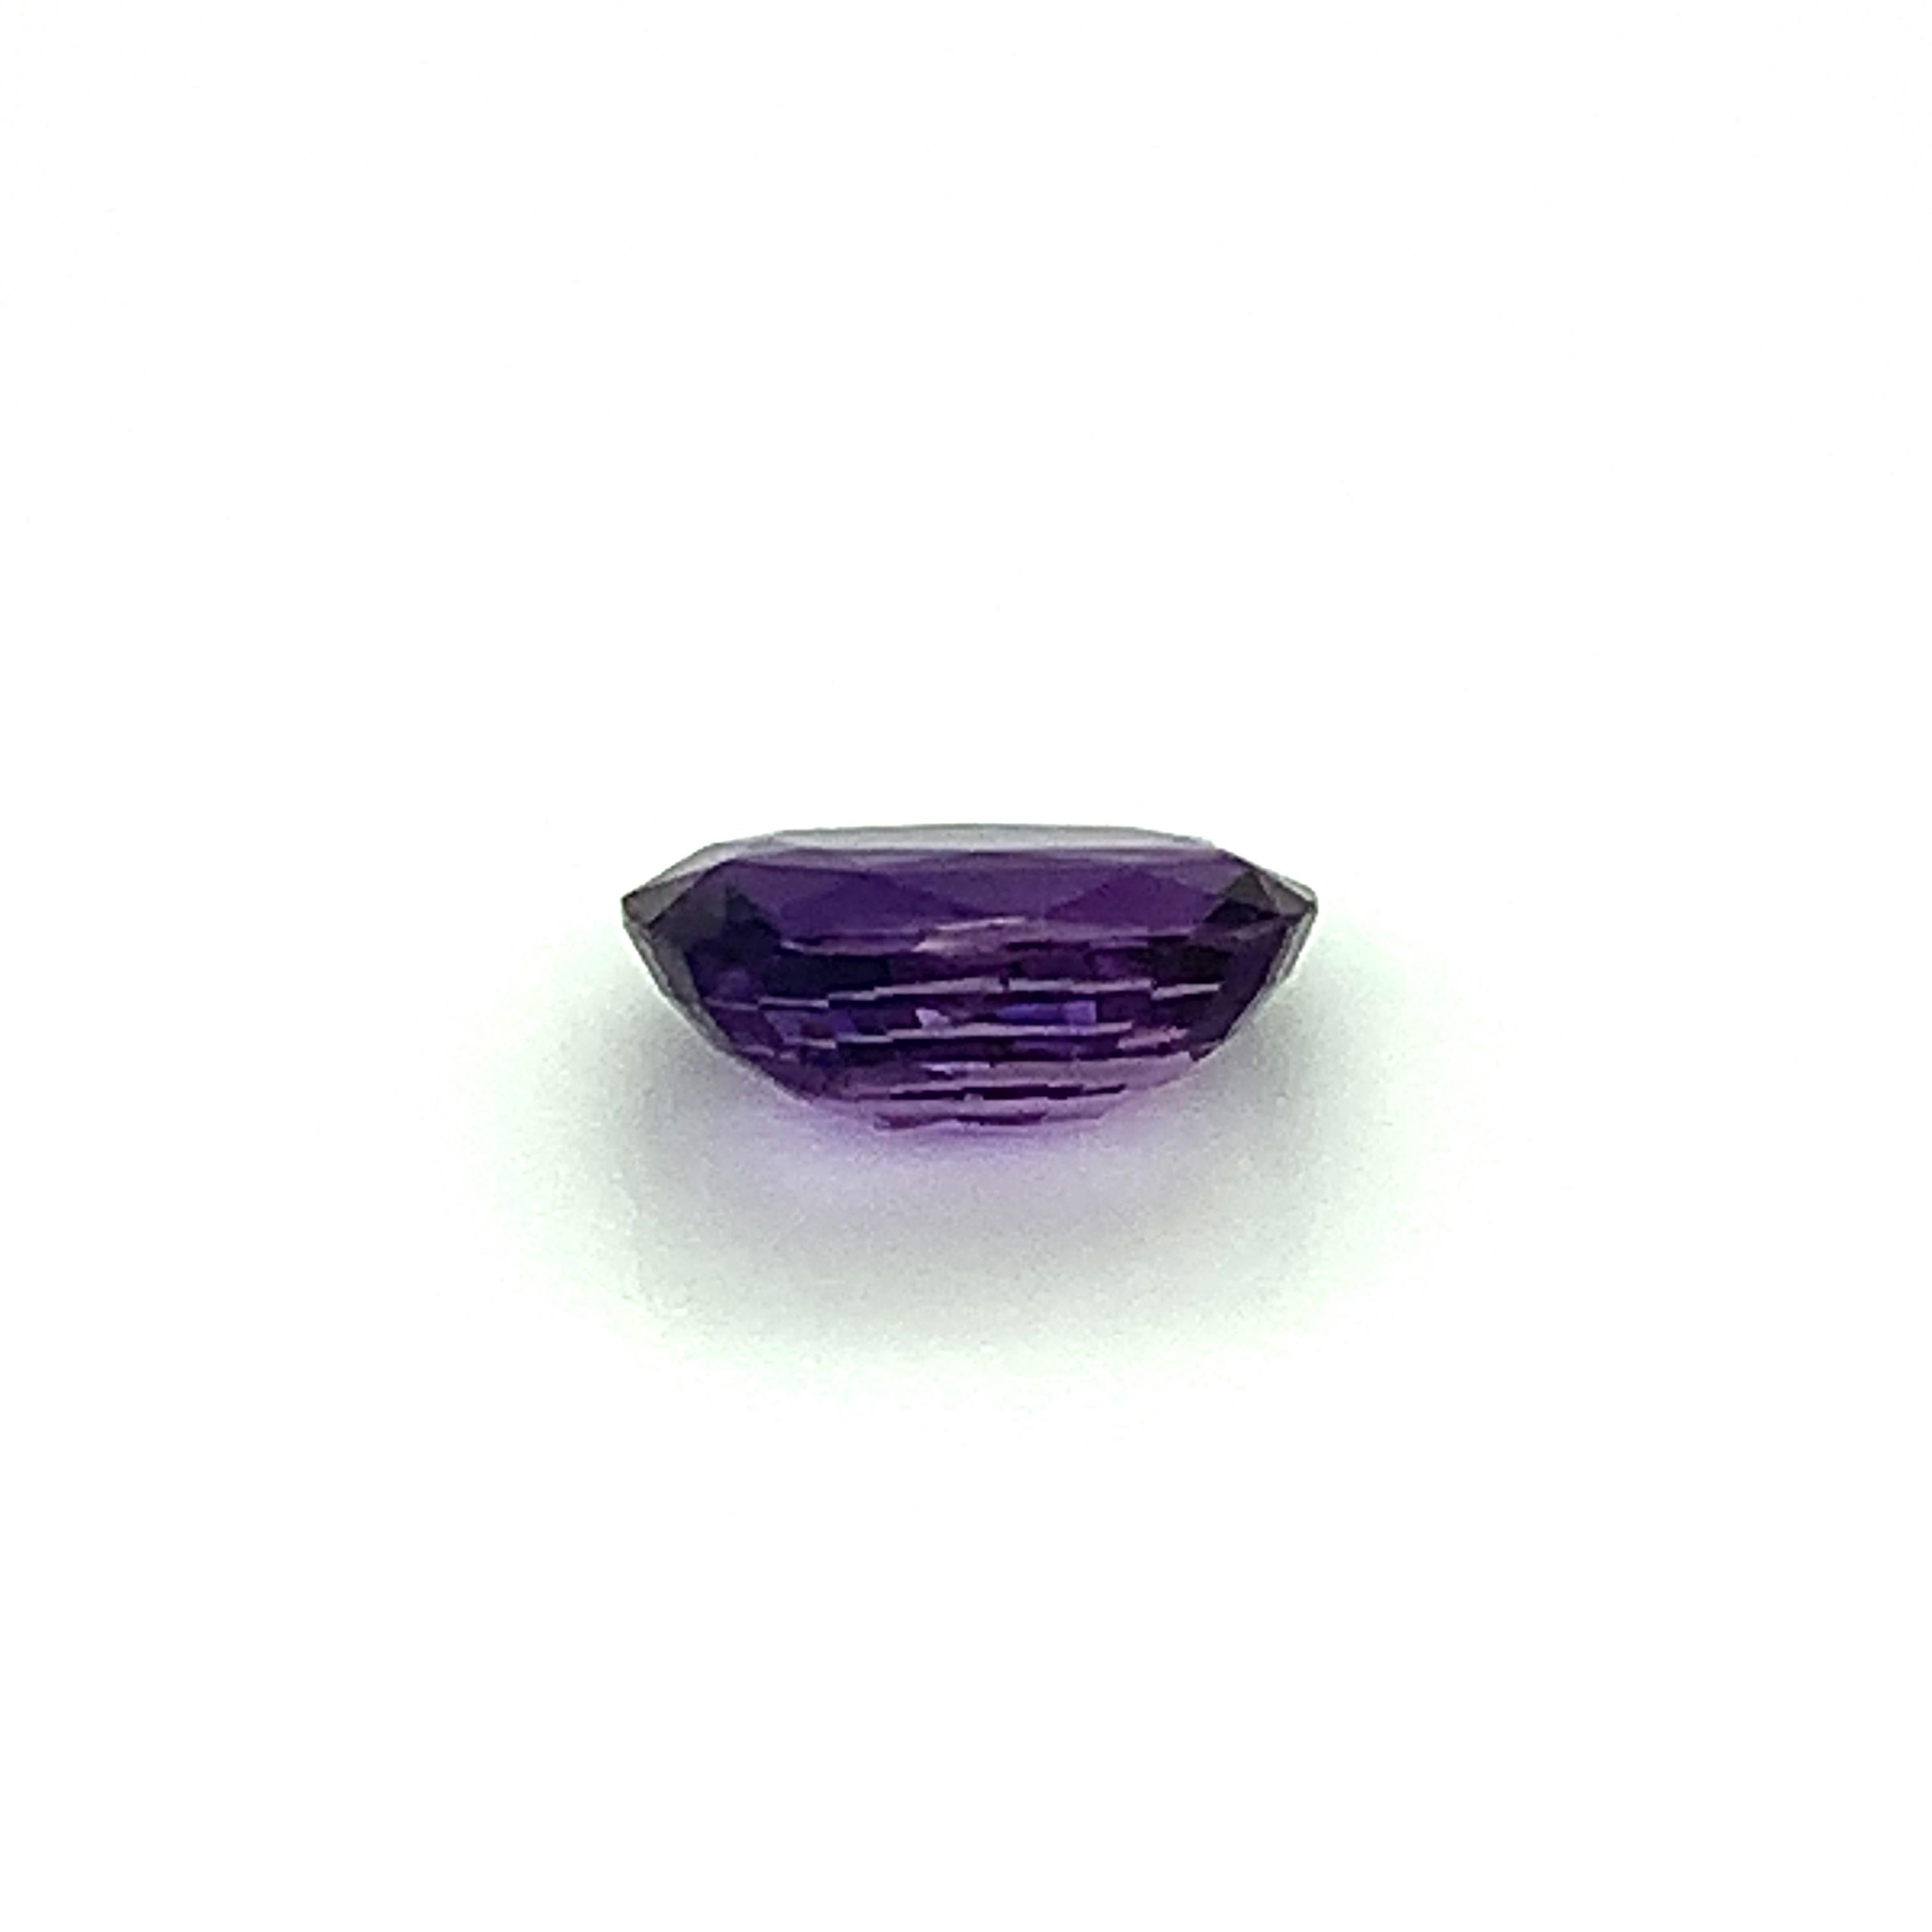 Unheated 3.50 Carat Color Change Sapphire, Unset Loose Gemstone, GIA Certified 2